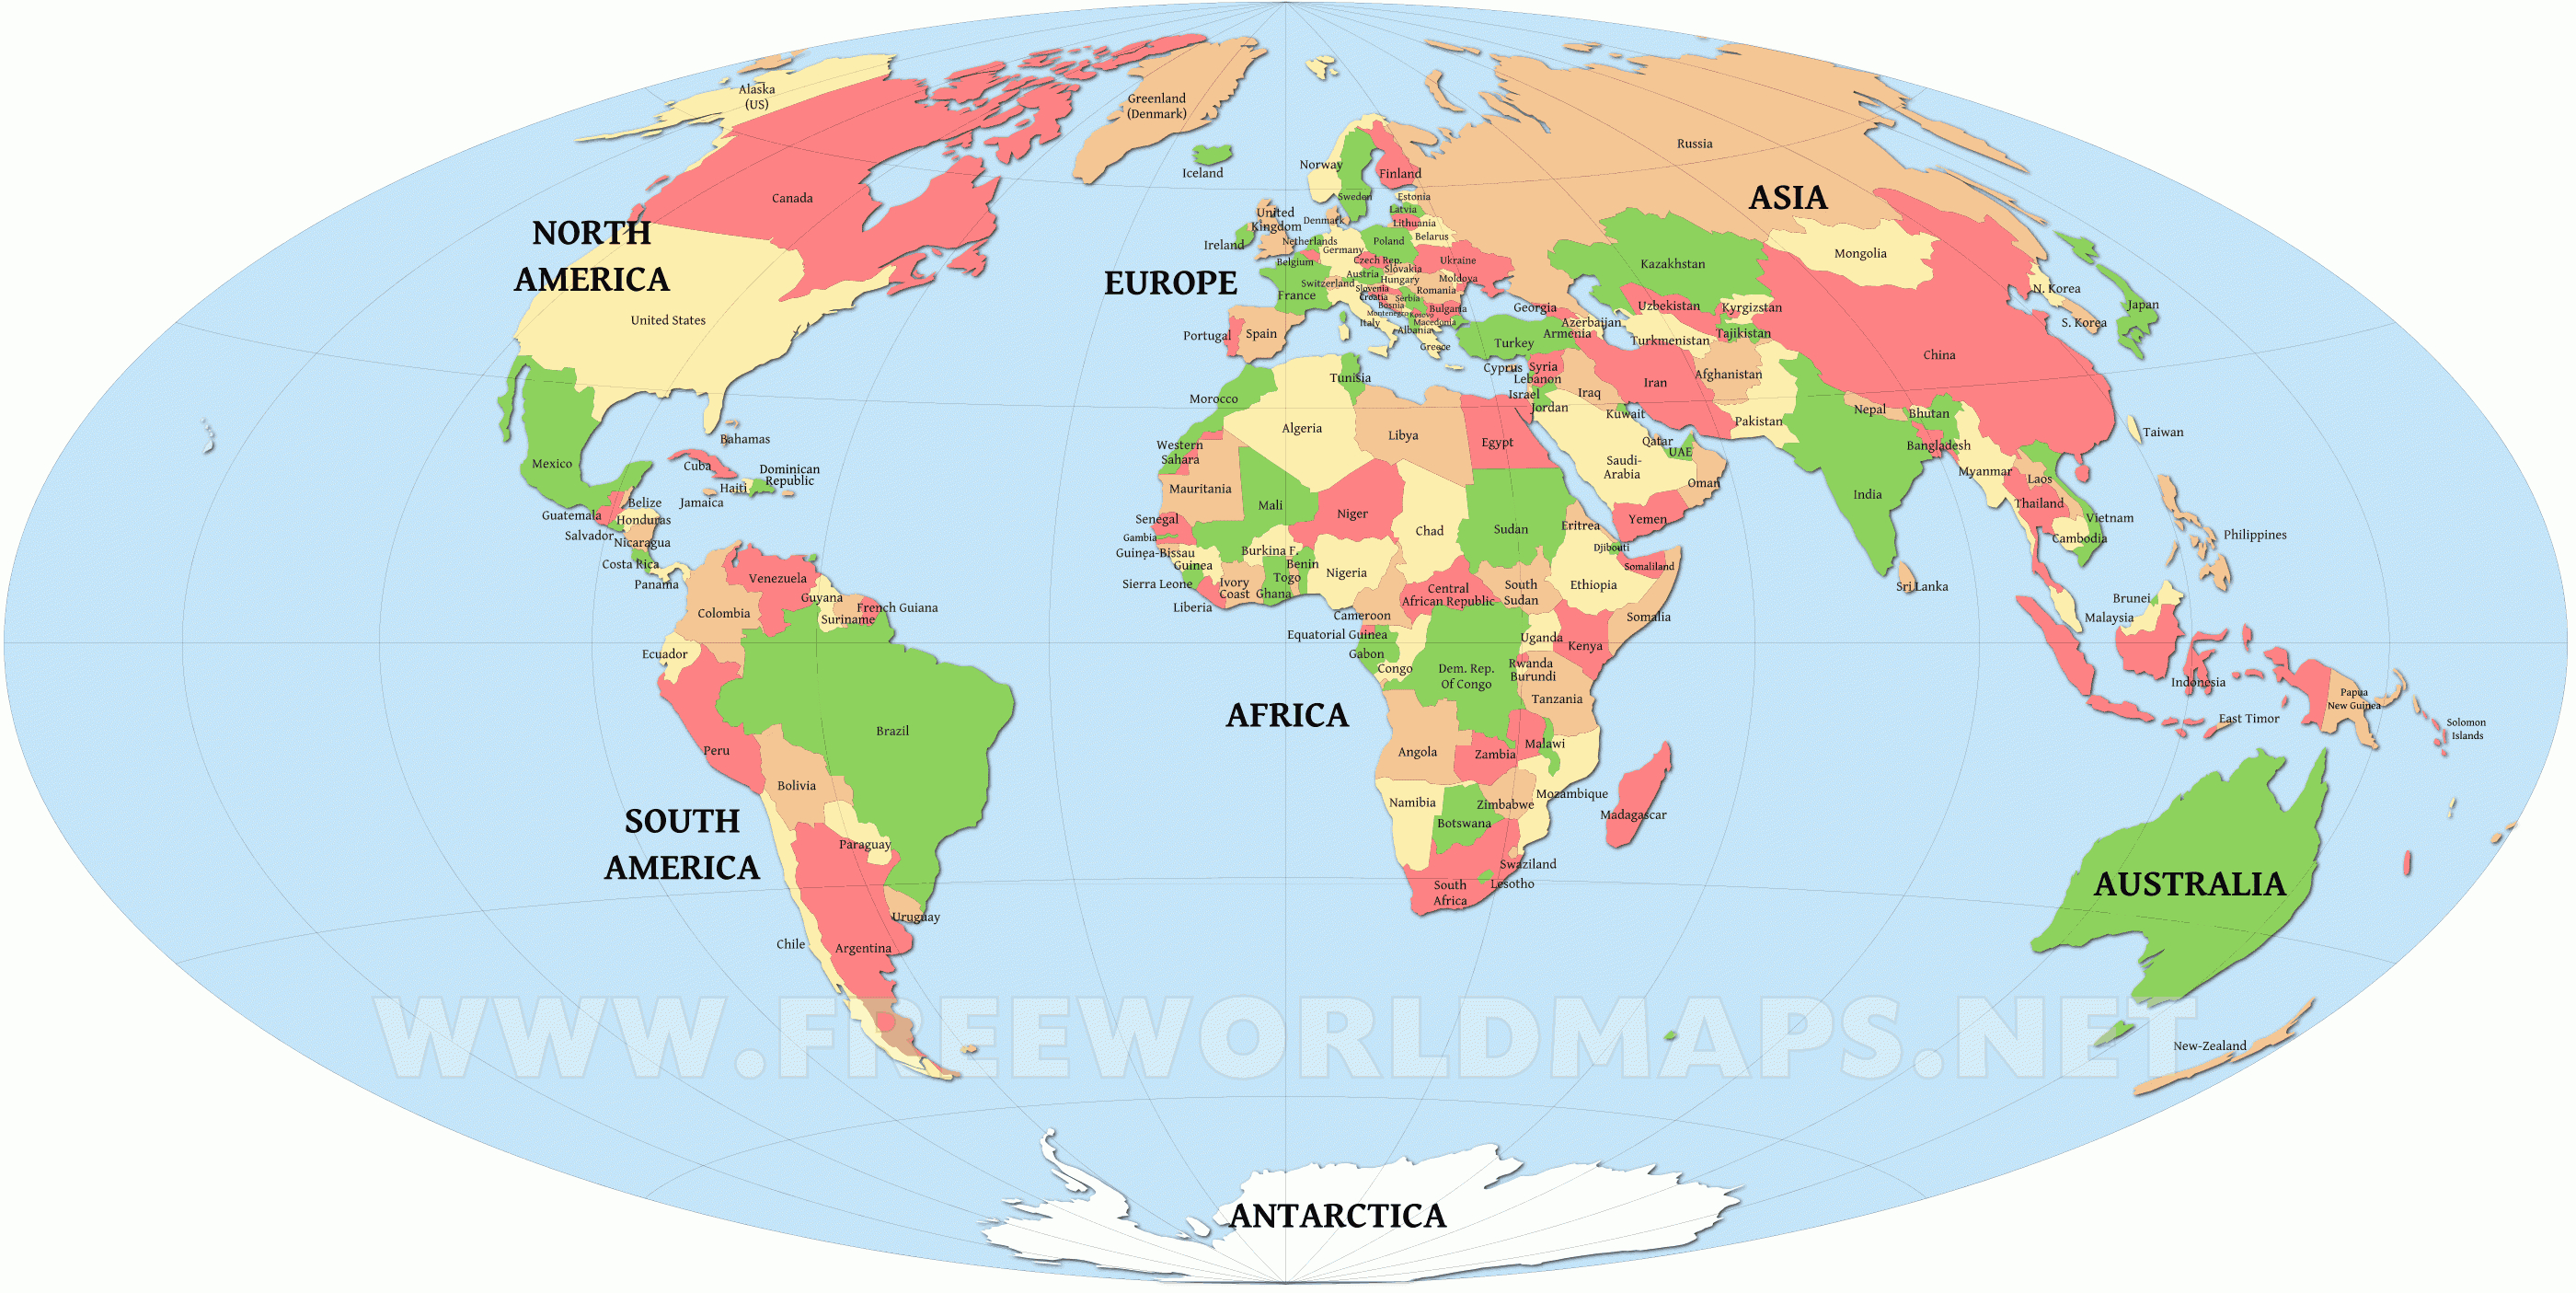 Free Printable World Maps - Free Printable World Map Images